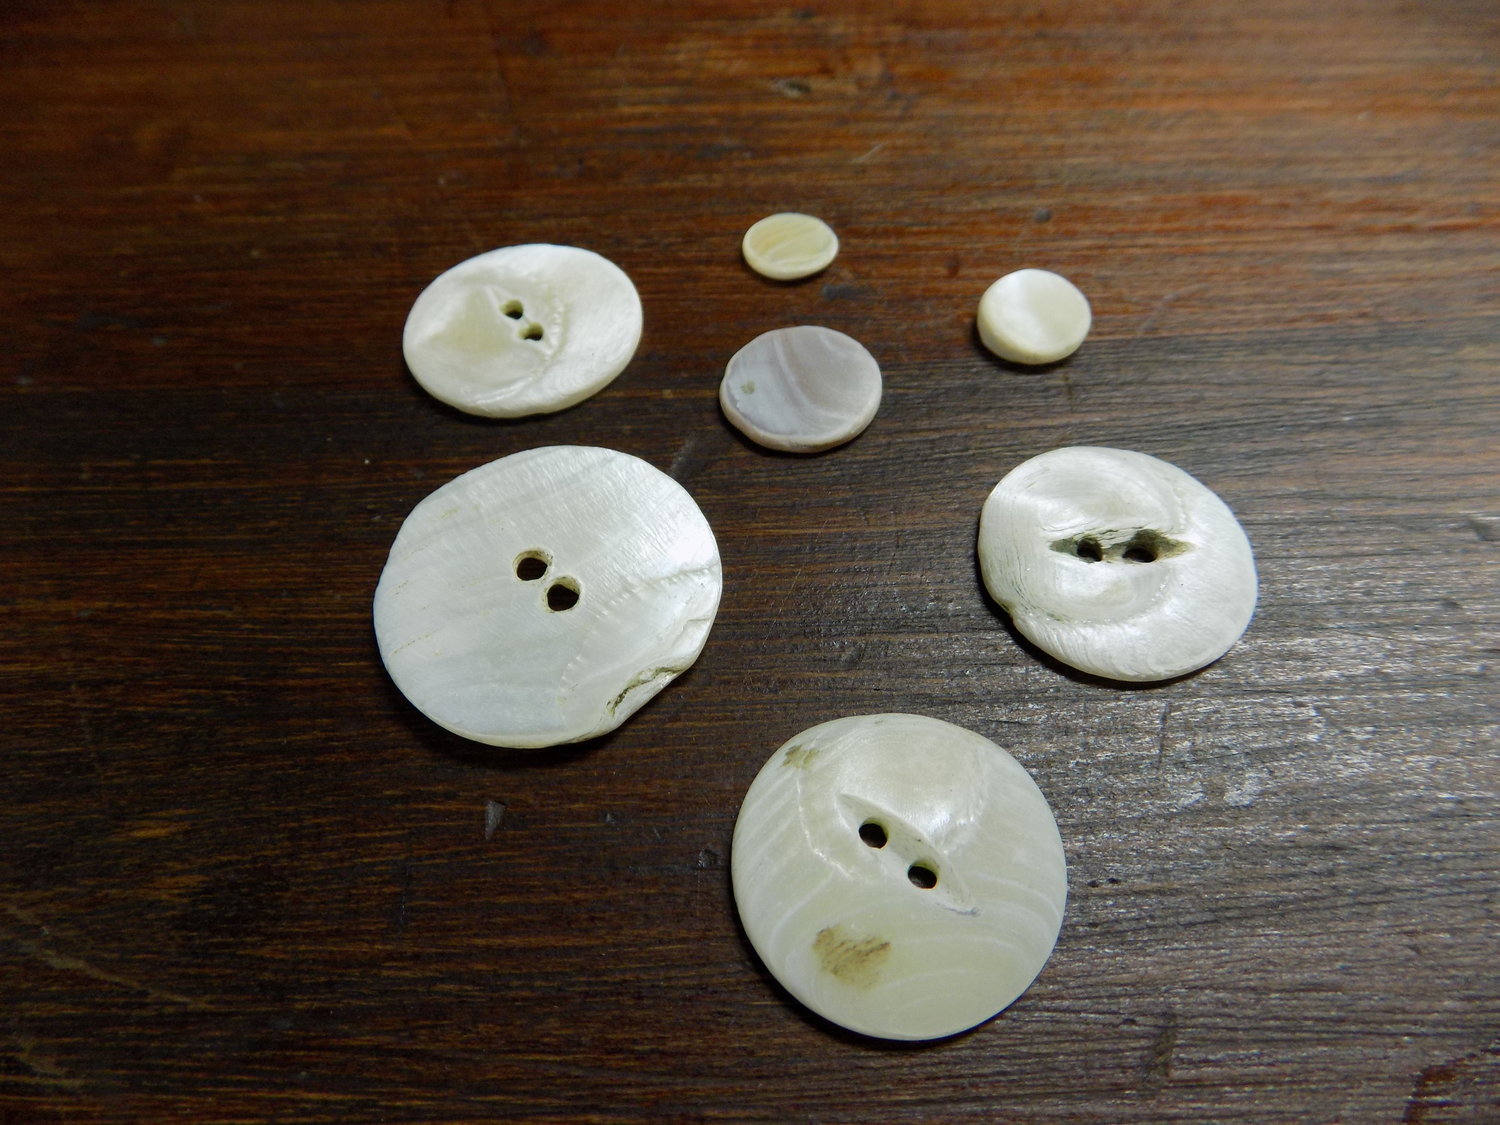 The birds could have chosen much larger buttons; these were representative of the buttons used as landscaping at the farm where the martins most likely found them.